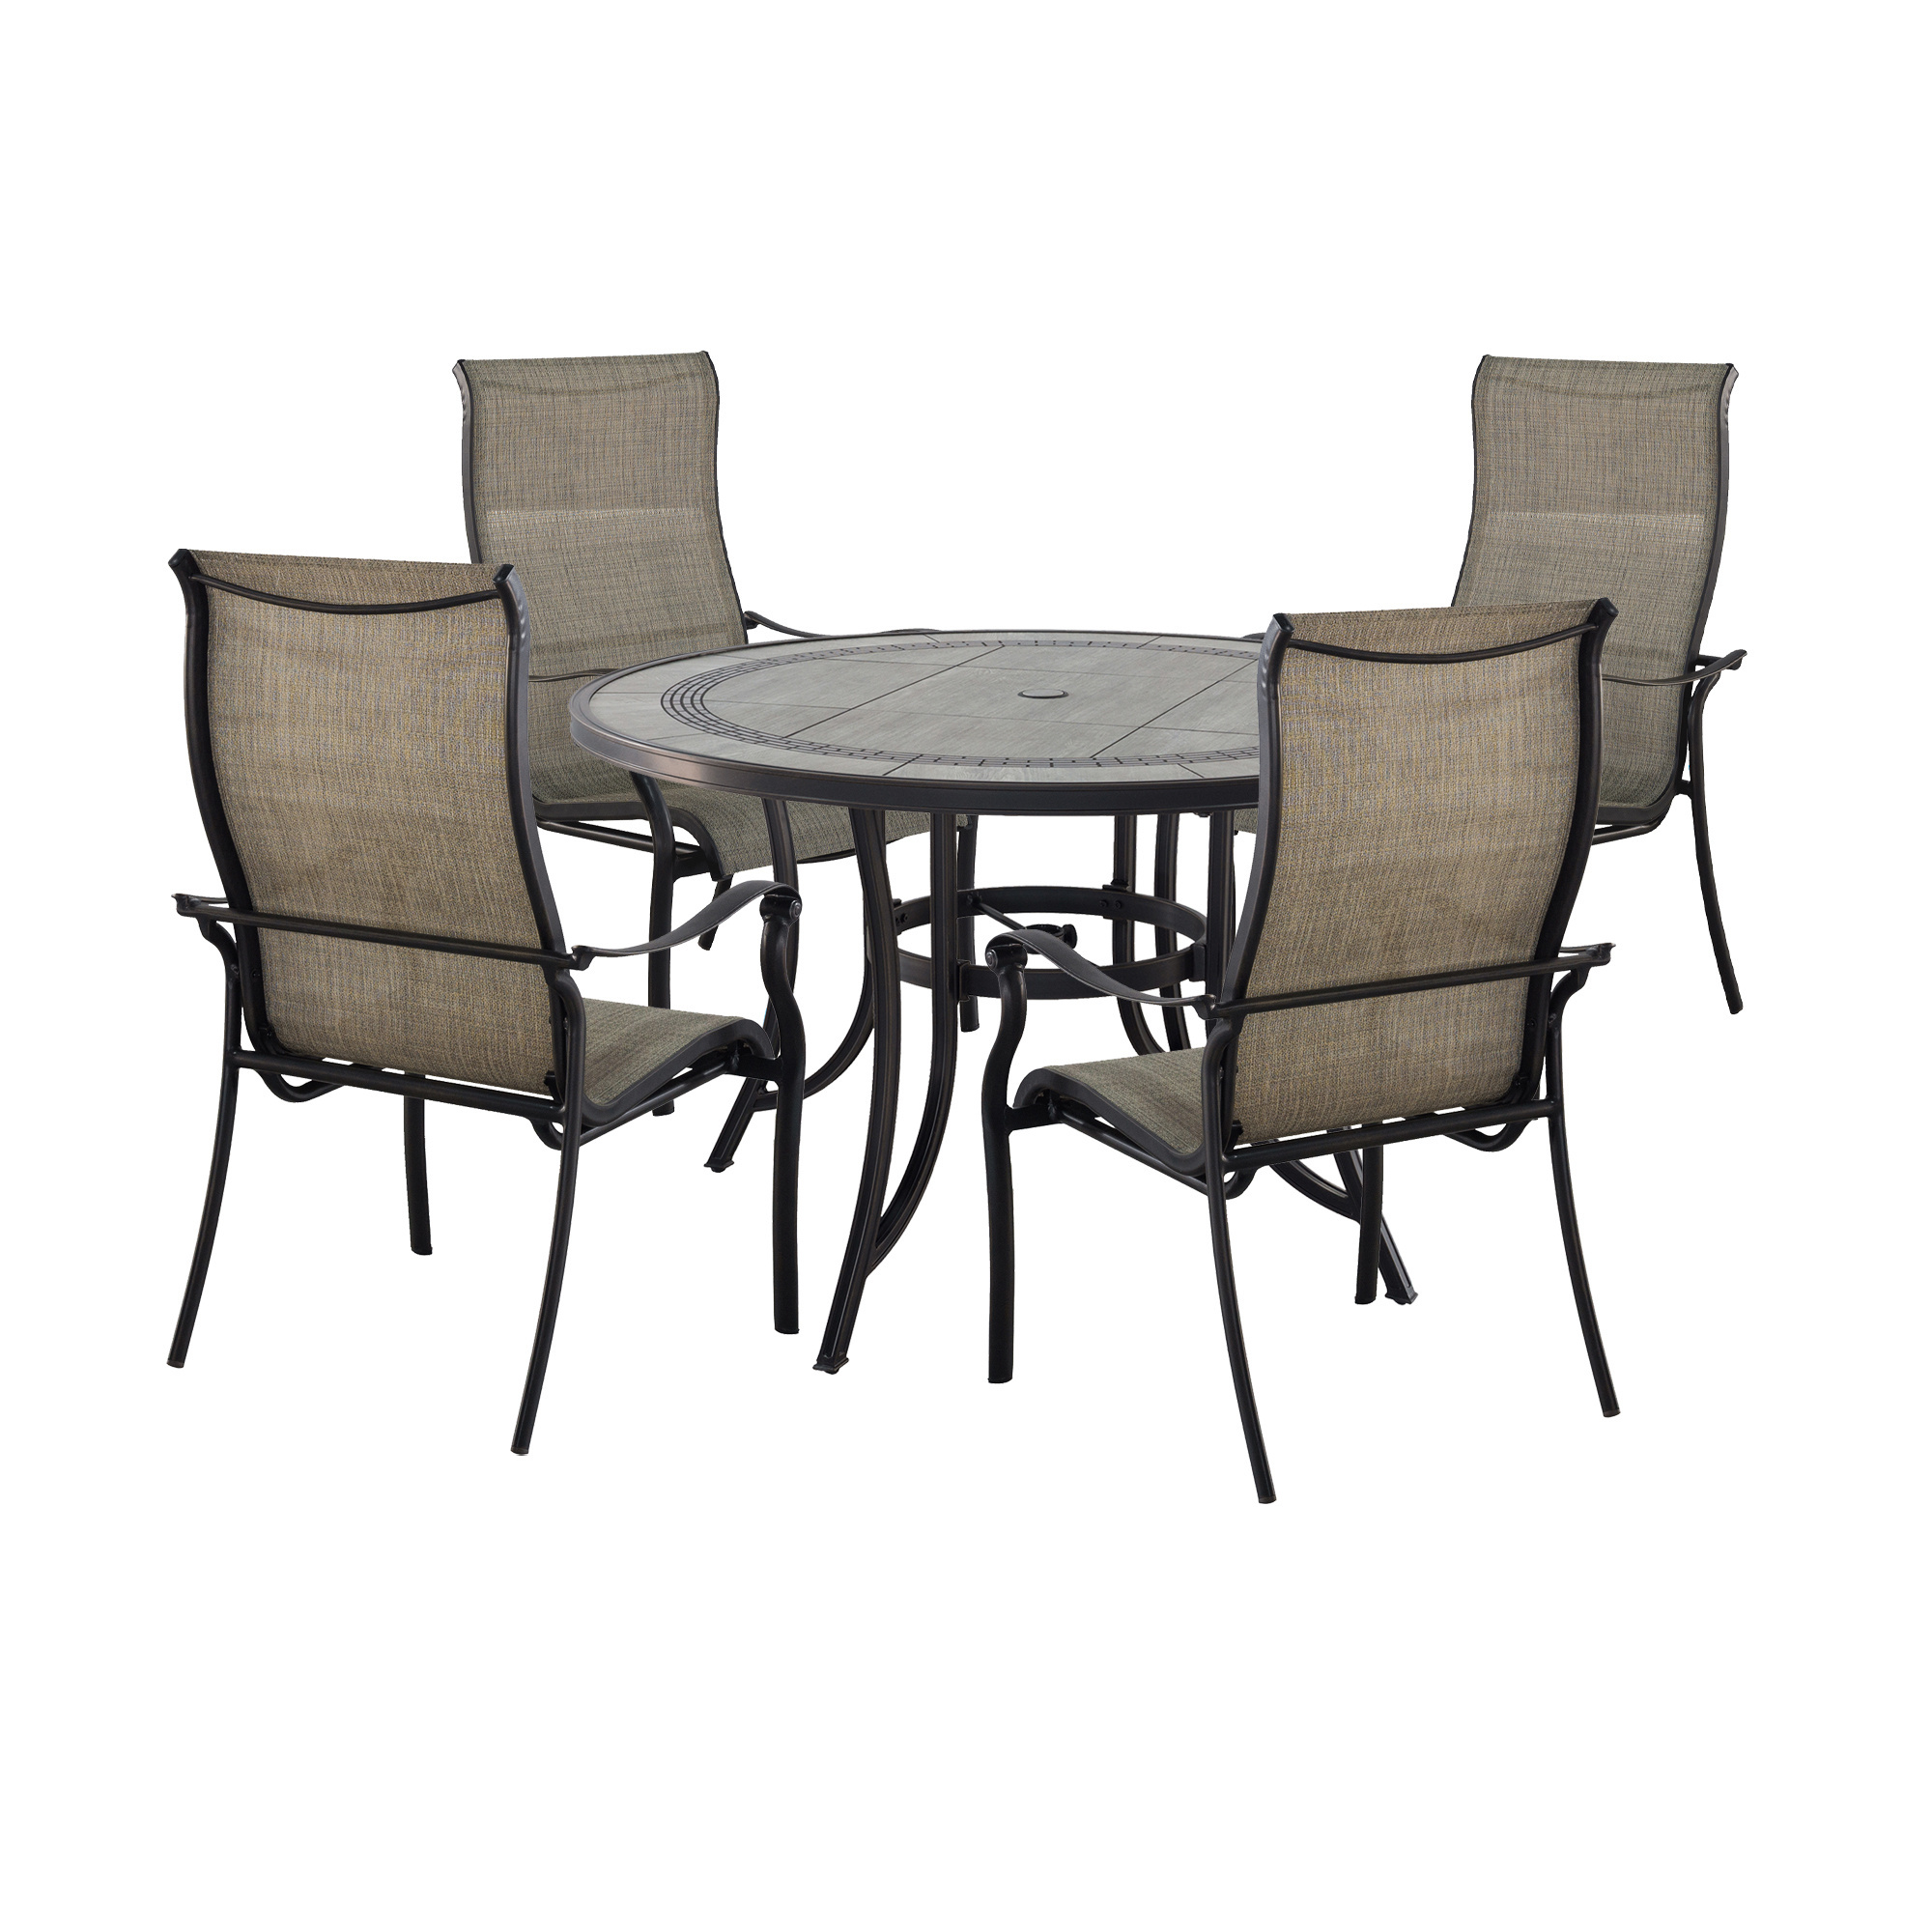 Cast Aluminum 5-Piece Outdoor Patio Dining Set with Ceramic Tile Top Round Table and Chairs